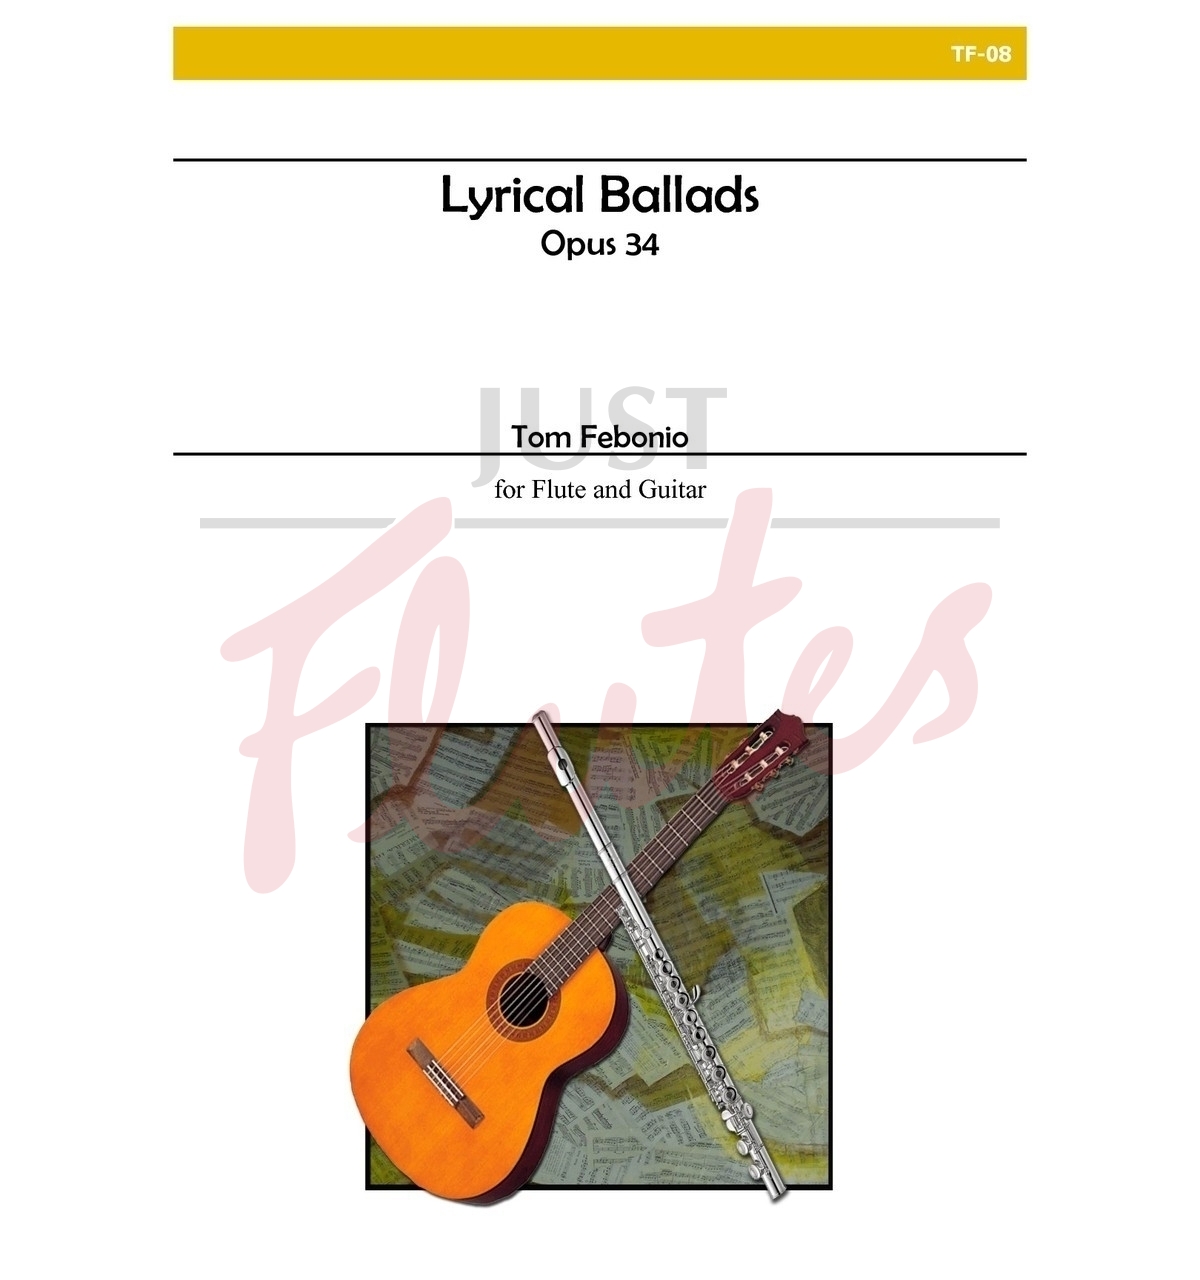 Lyrical Ballads for Flute and Guitar